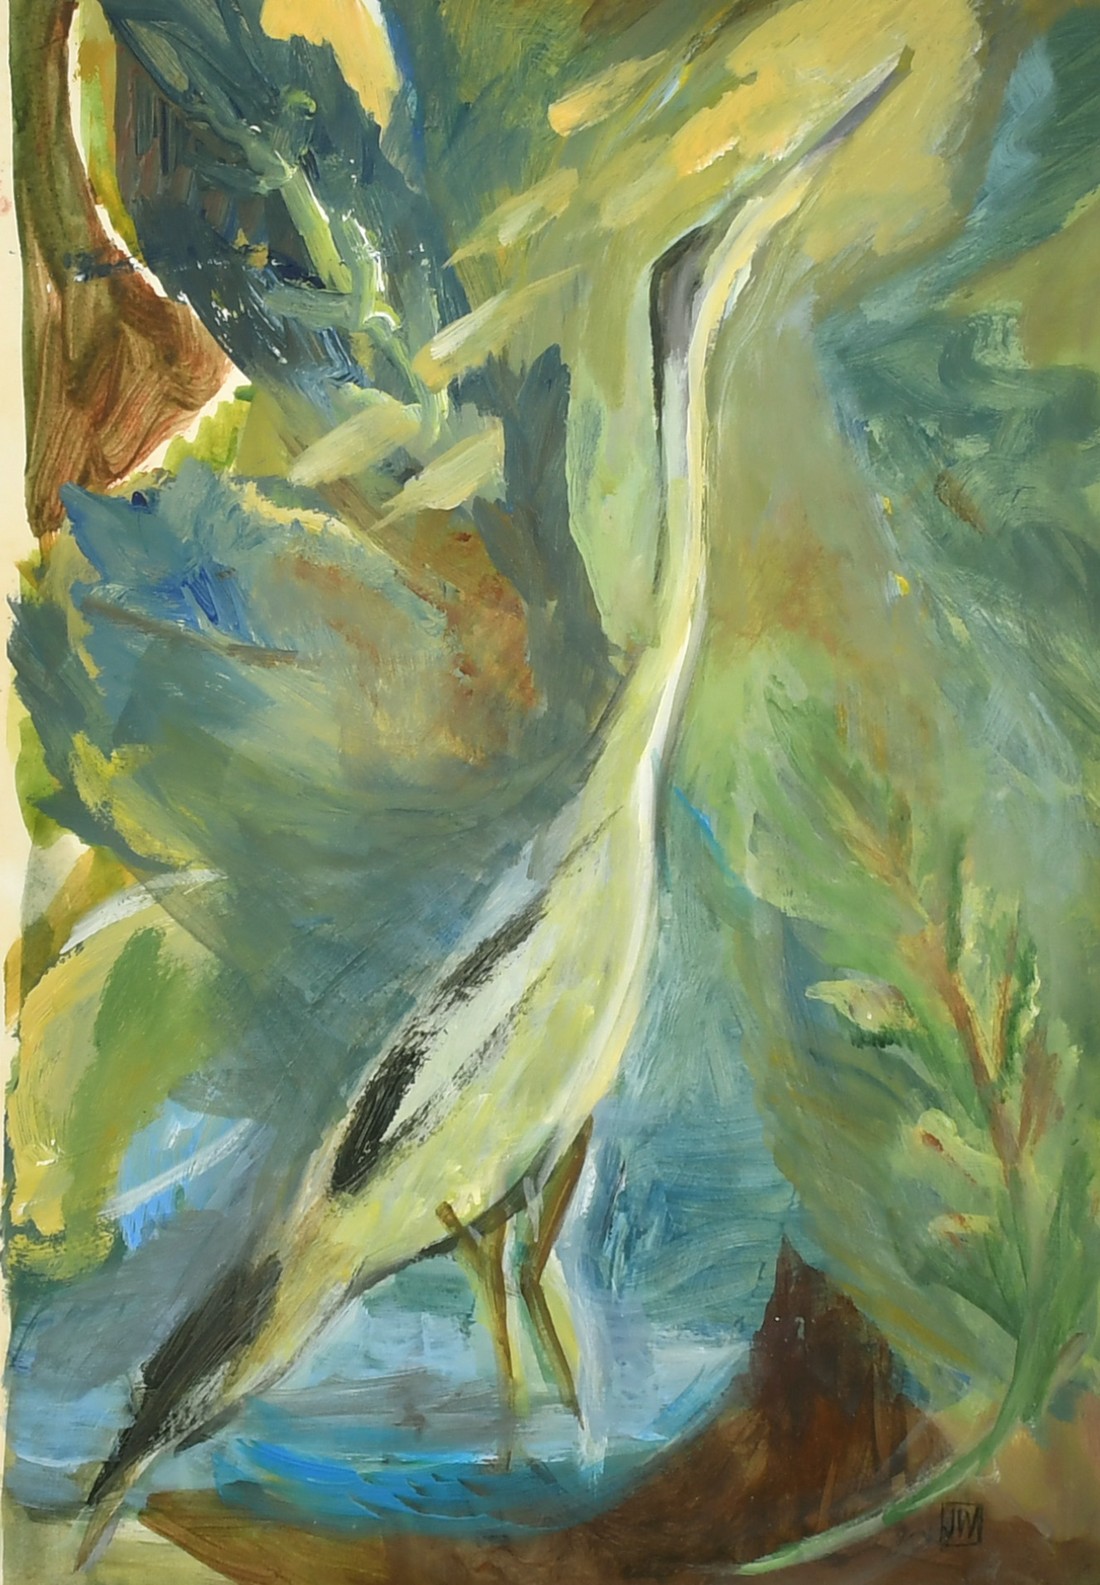 Jean Webster, 'Heron in caves of Green' acrylic on paper, signed with monogram, titled on label